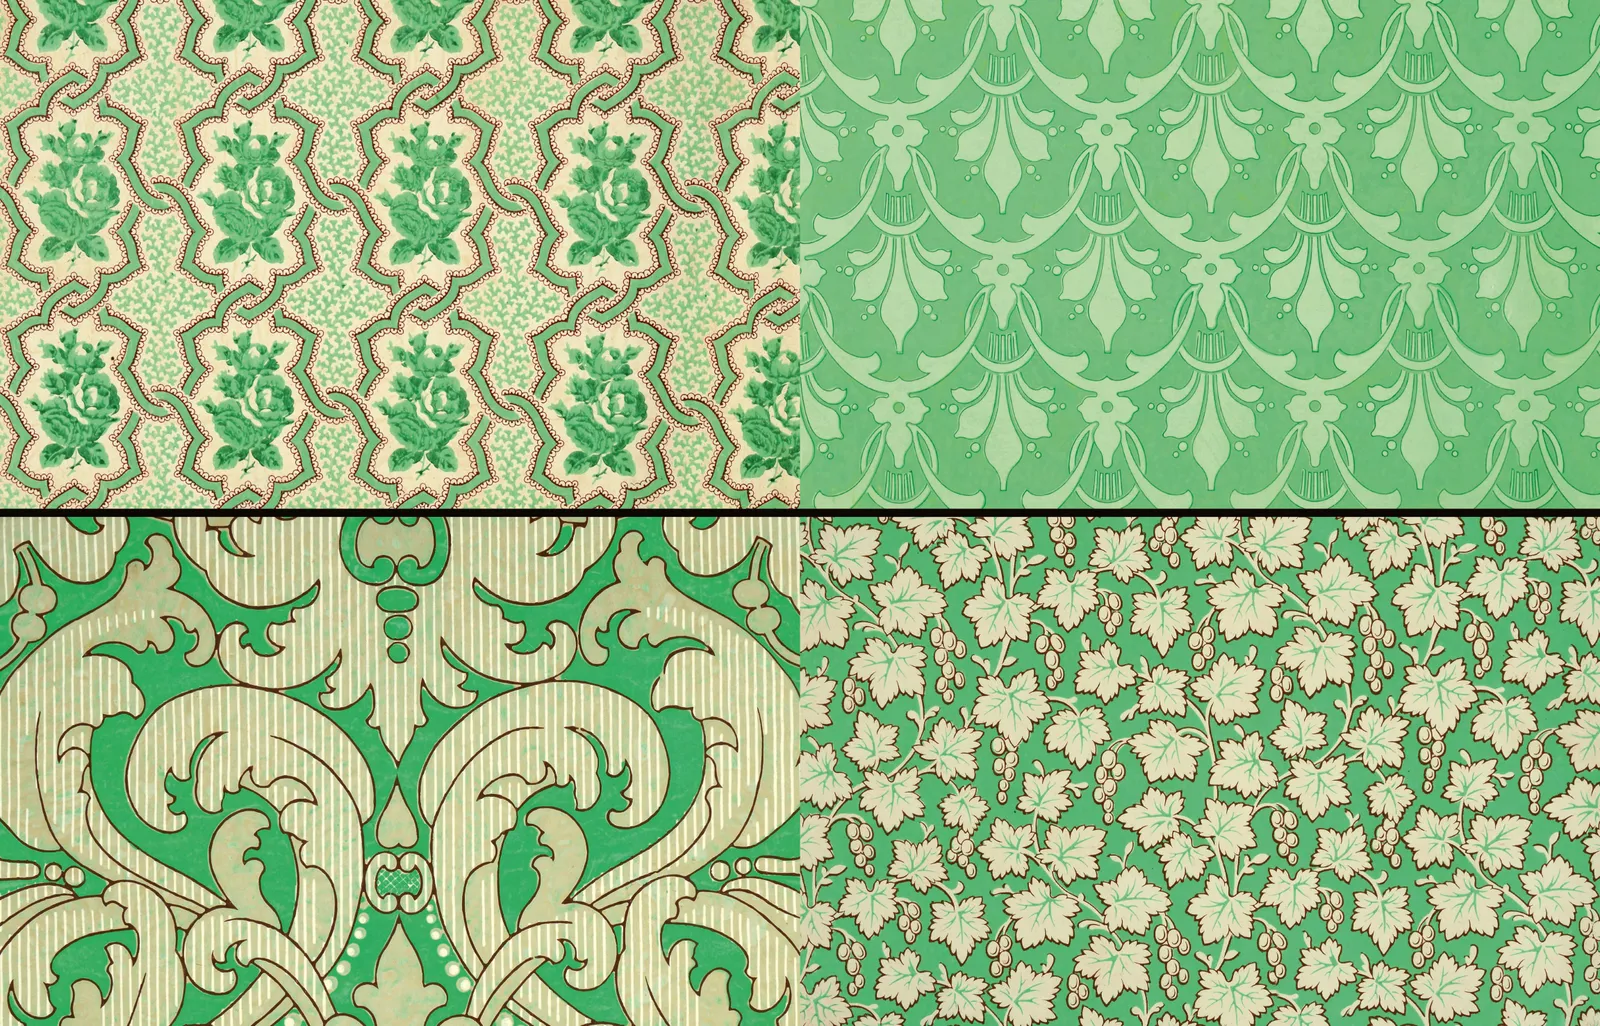 Arsenic and Old Tastes Made Victorian Wallpaper Deadly | Smart News|  Smithsonian Magazine